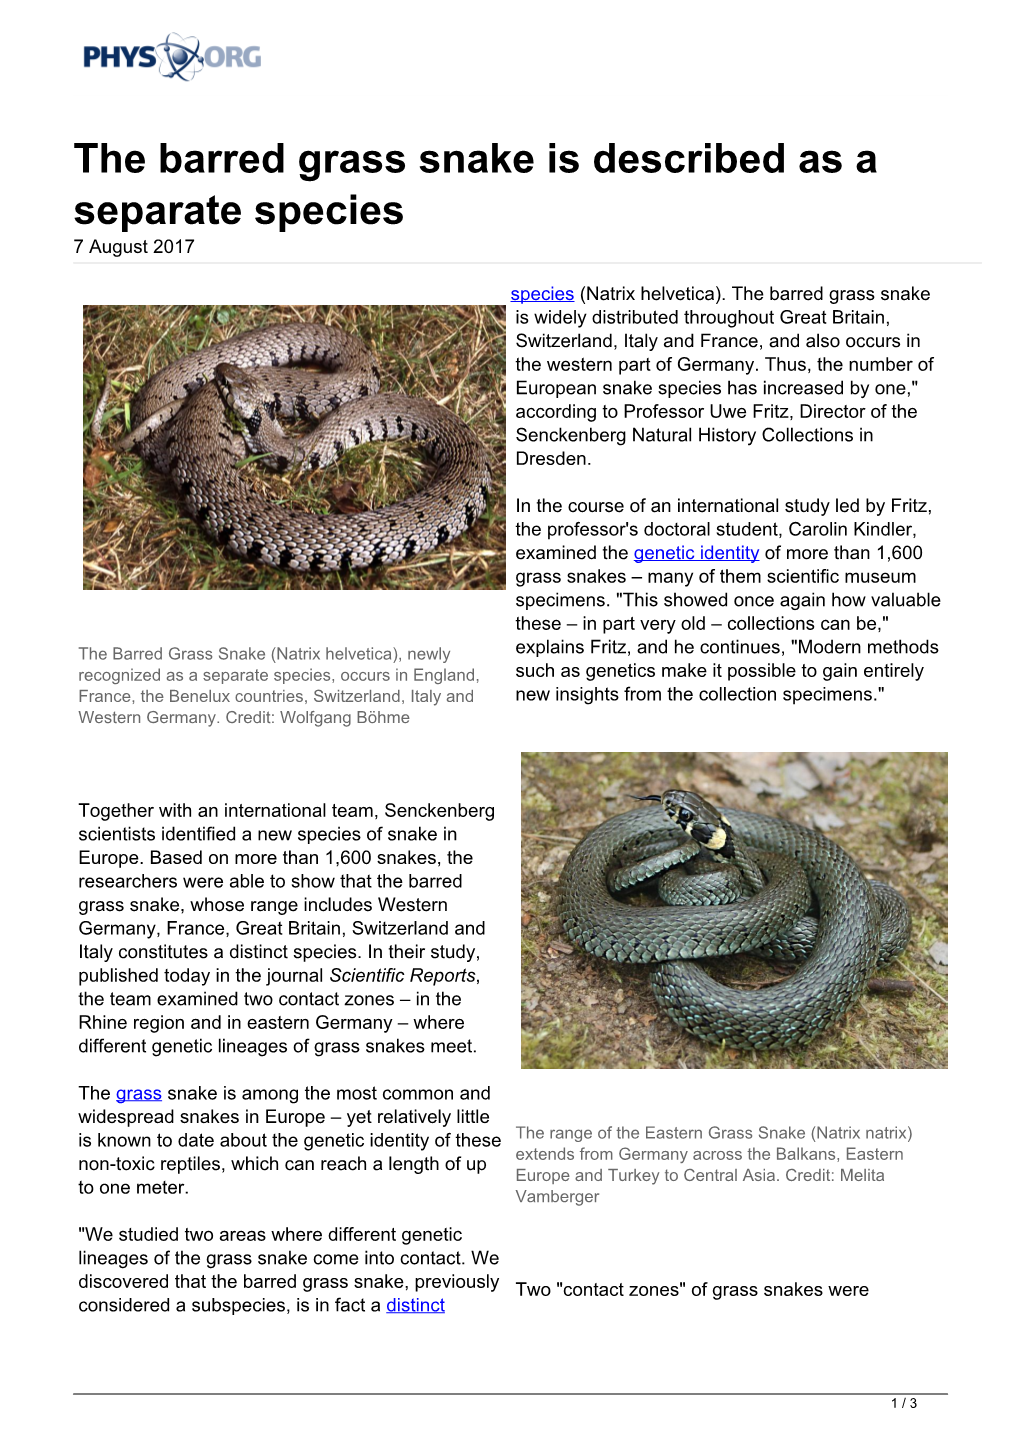 The Barred Grass Snake Is Described As a Separate Species 7 August 2017